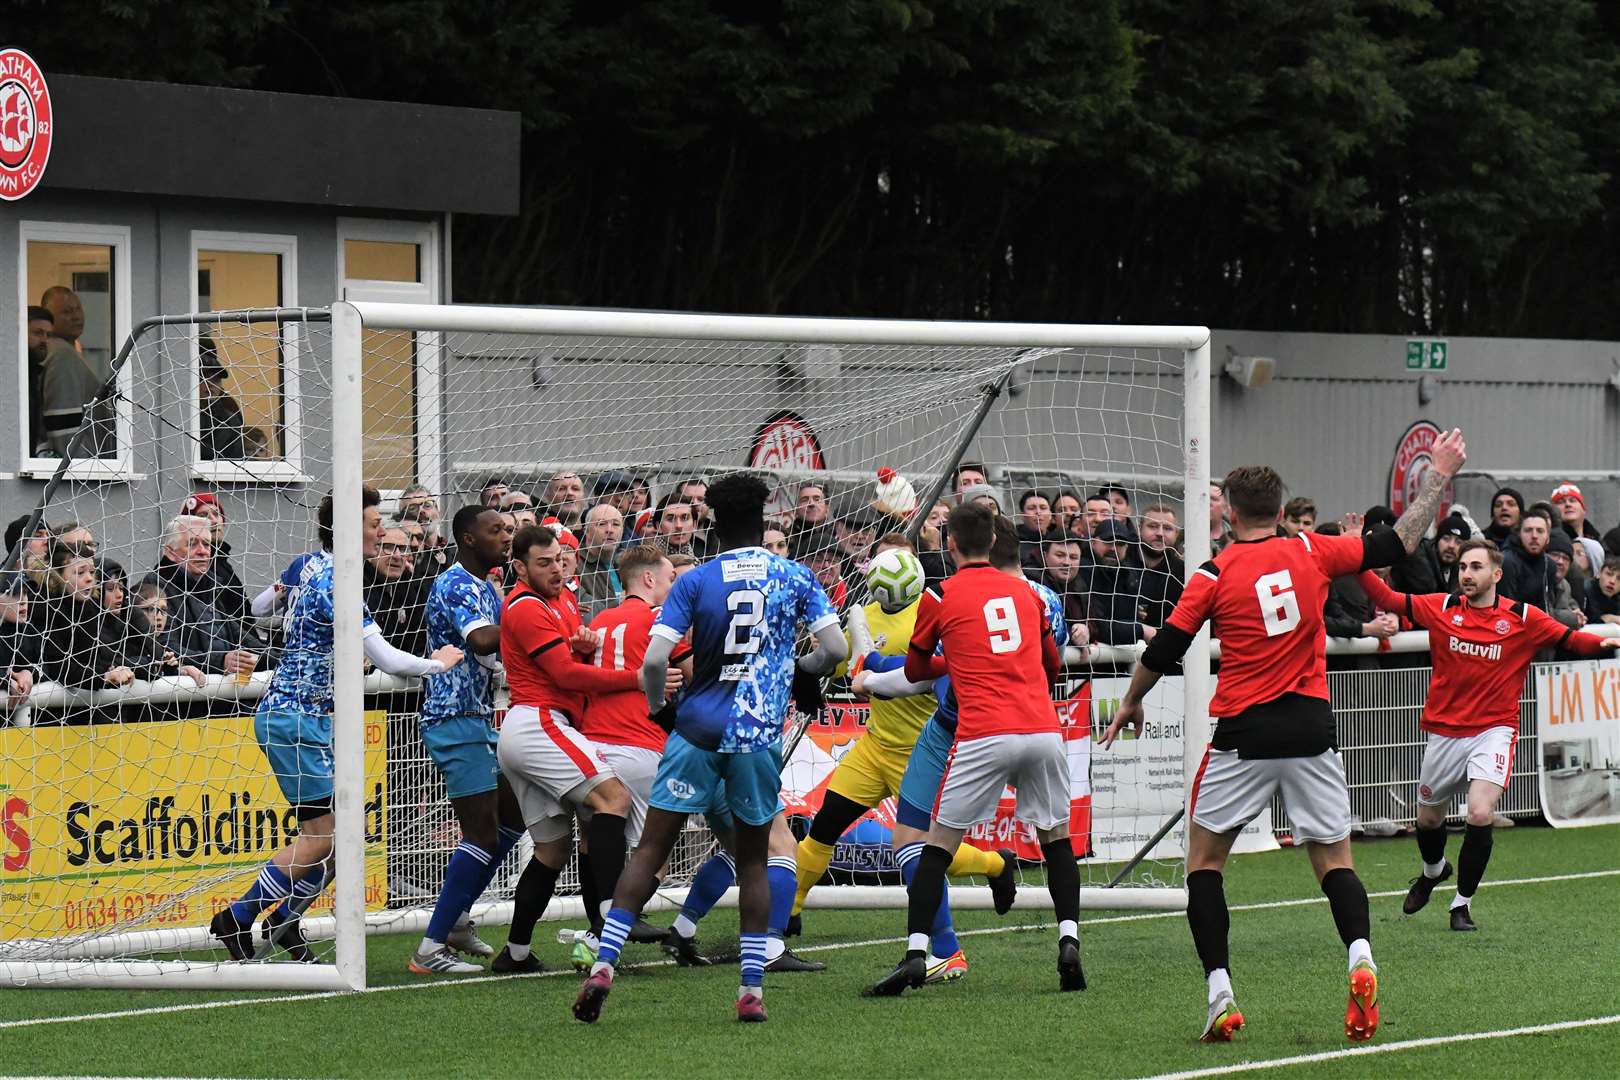 Chatham Town versus Sheppey United goalmouth action Picture: Marc Richards